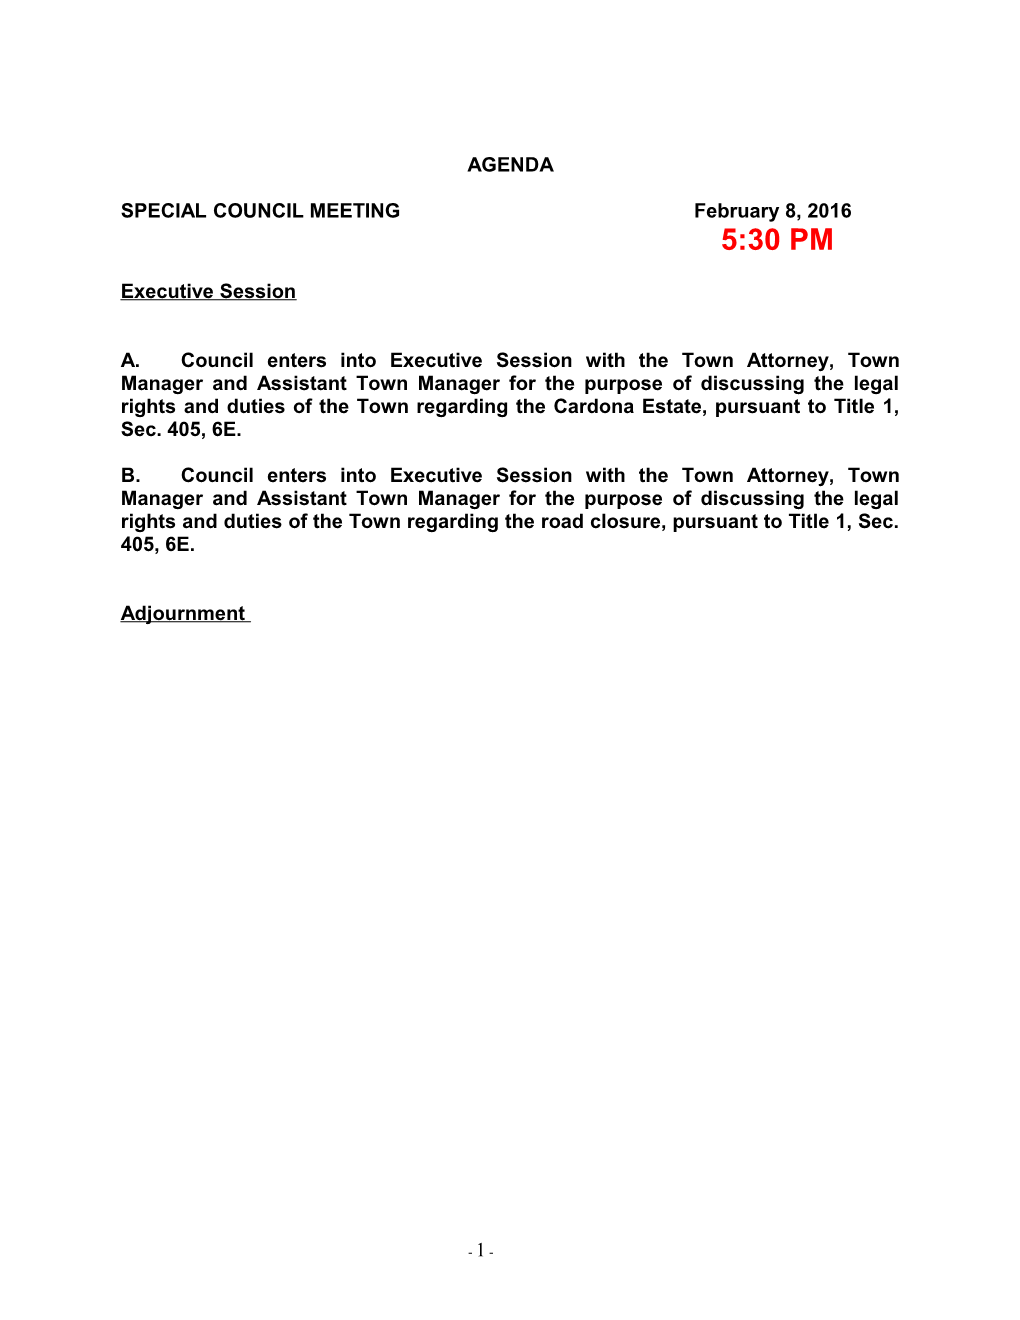 SPECIAL COUNCIL MEETING February 8, 2016